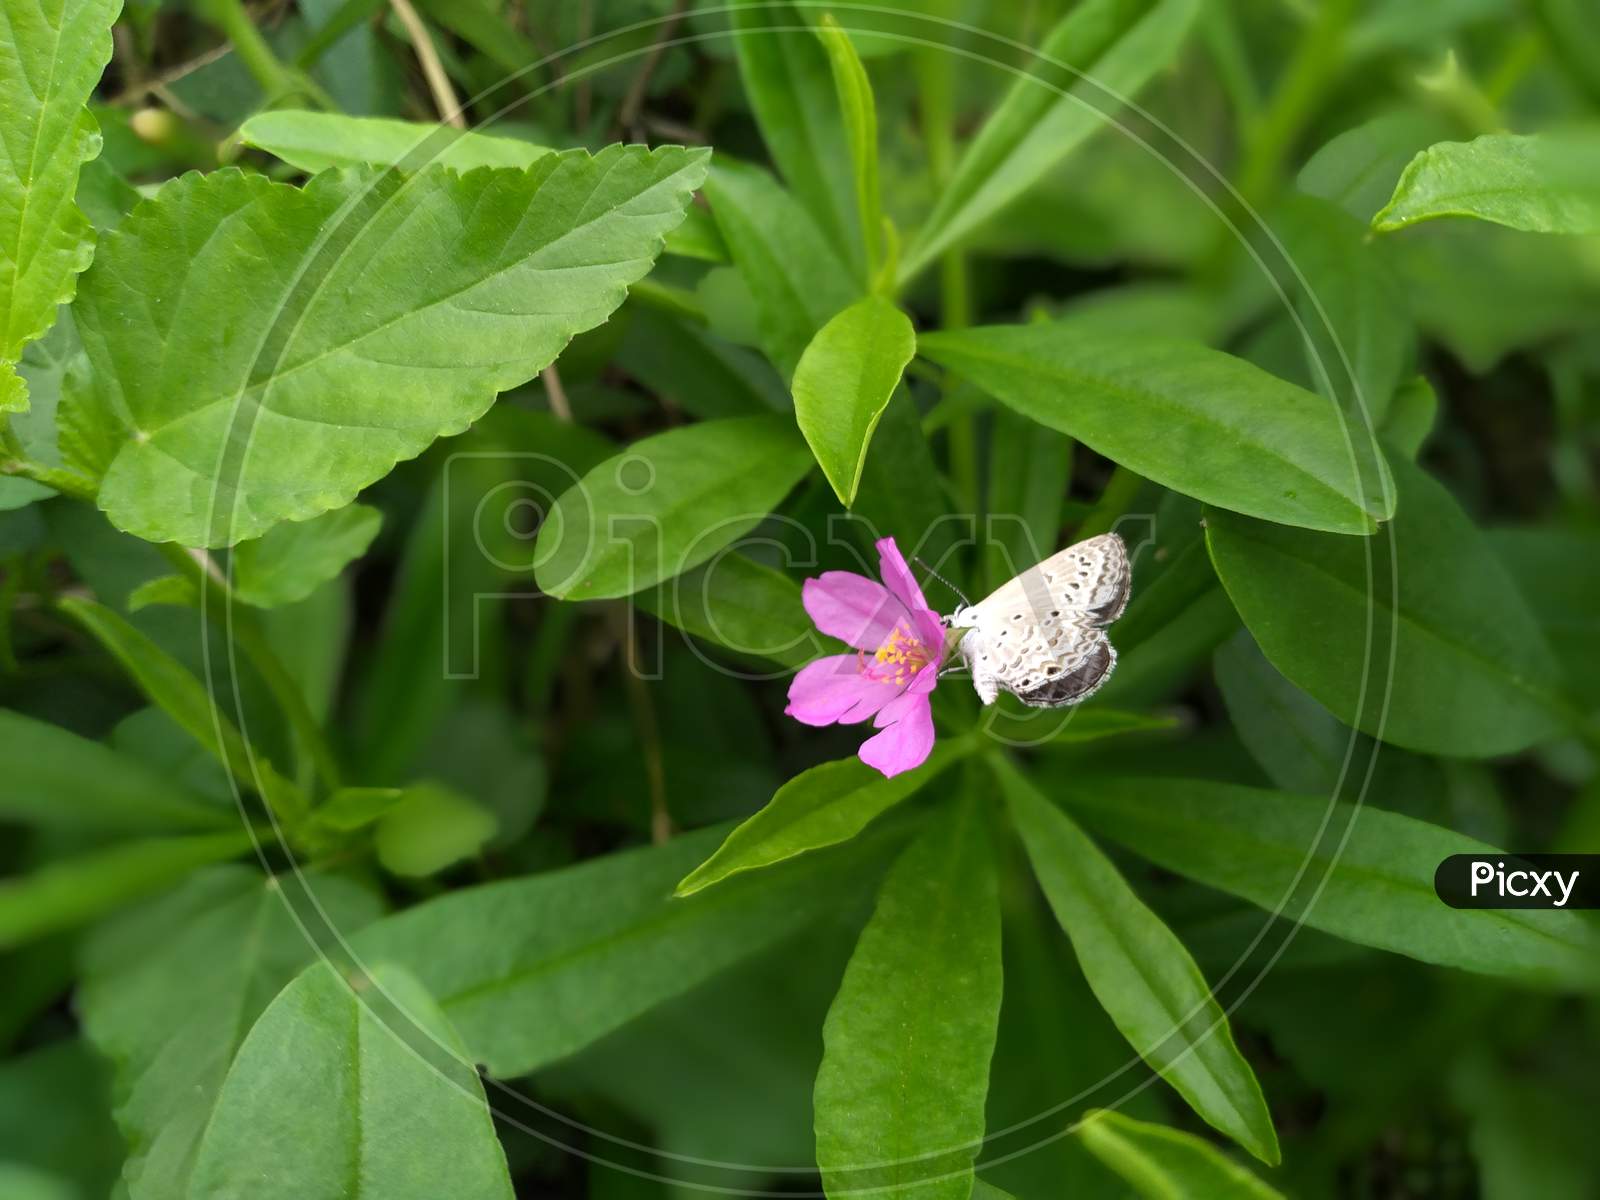 A small brown colored butterfly is sitting on a small pink flower, which looks quite good to see, whose scientific name is Talinum paniculatum flower.